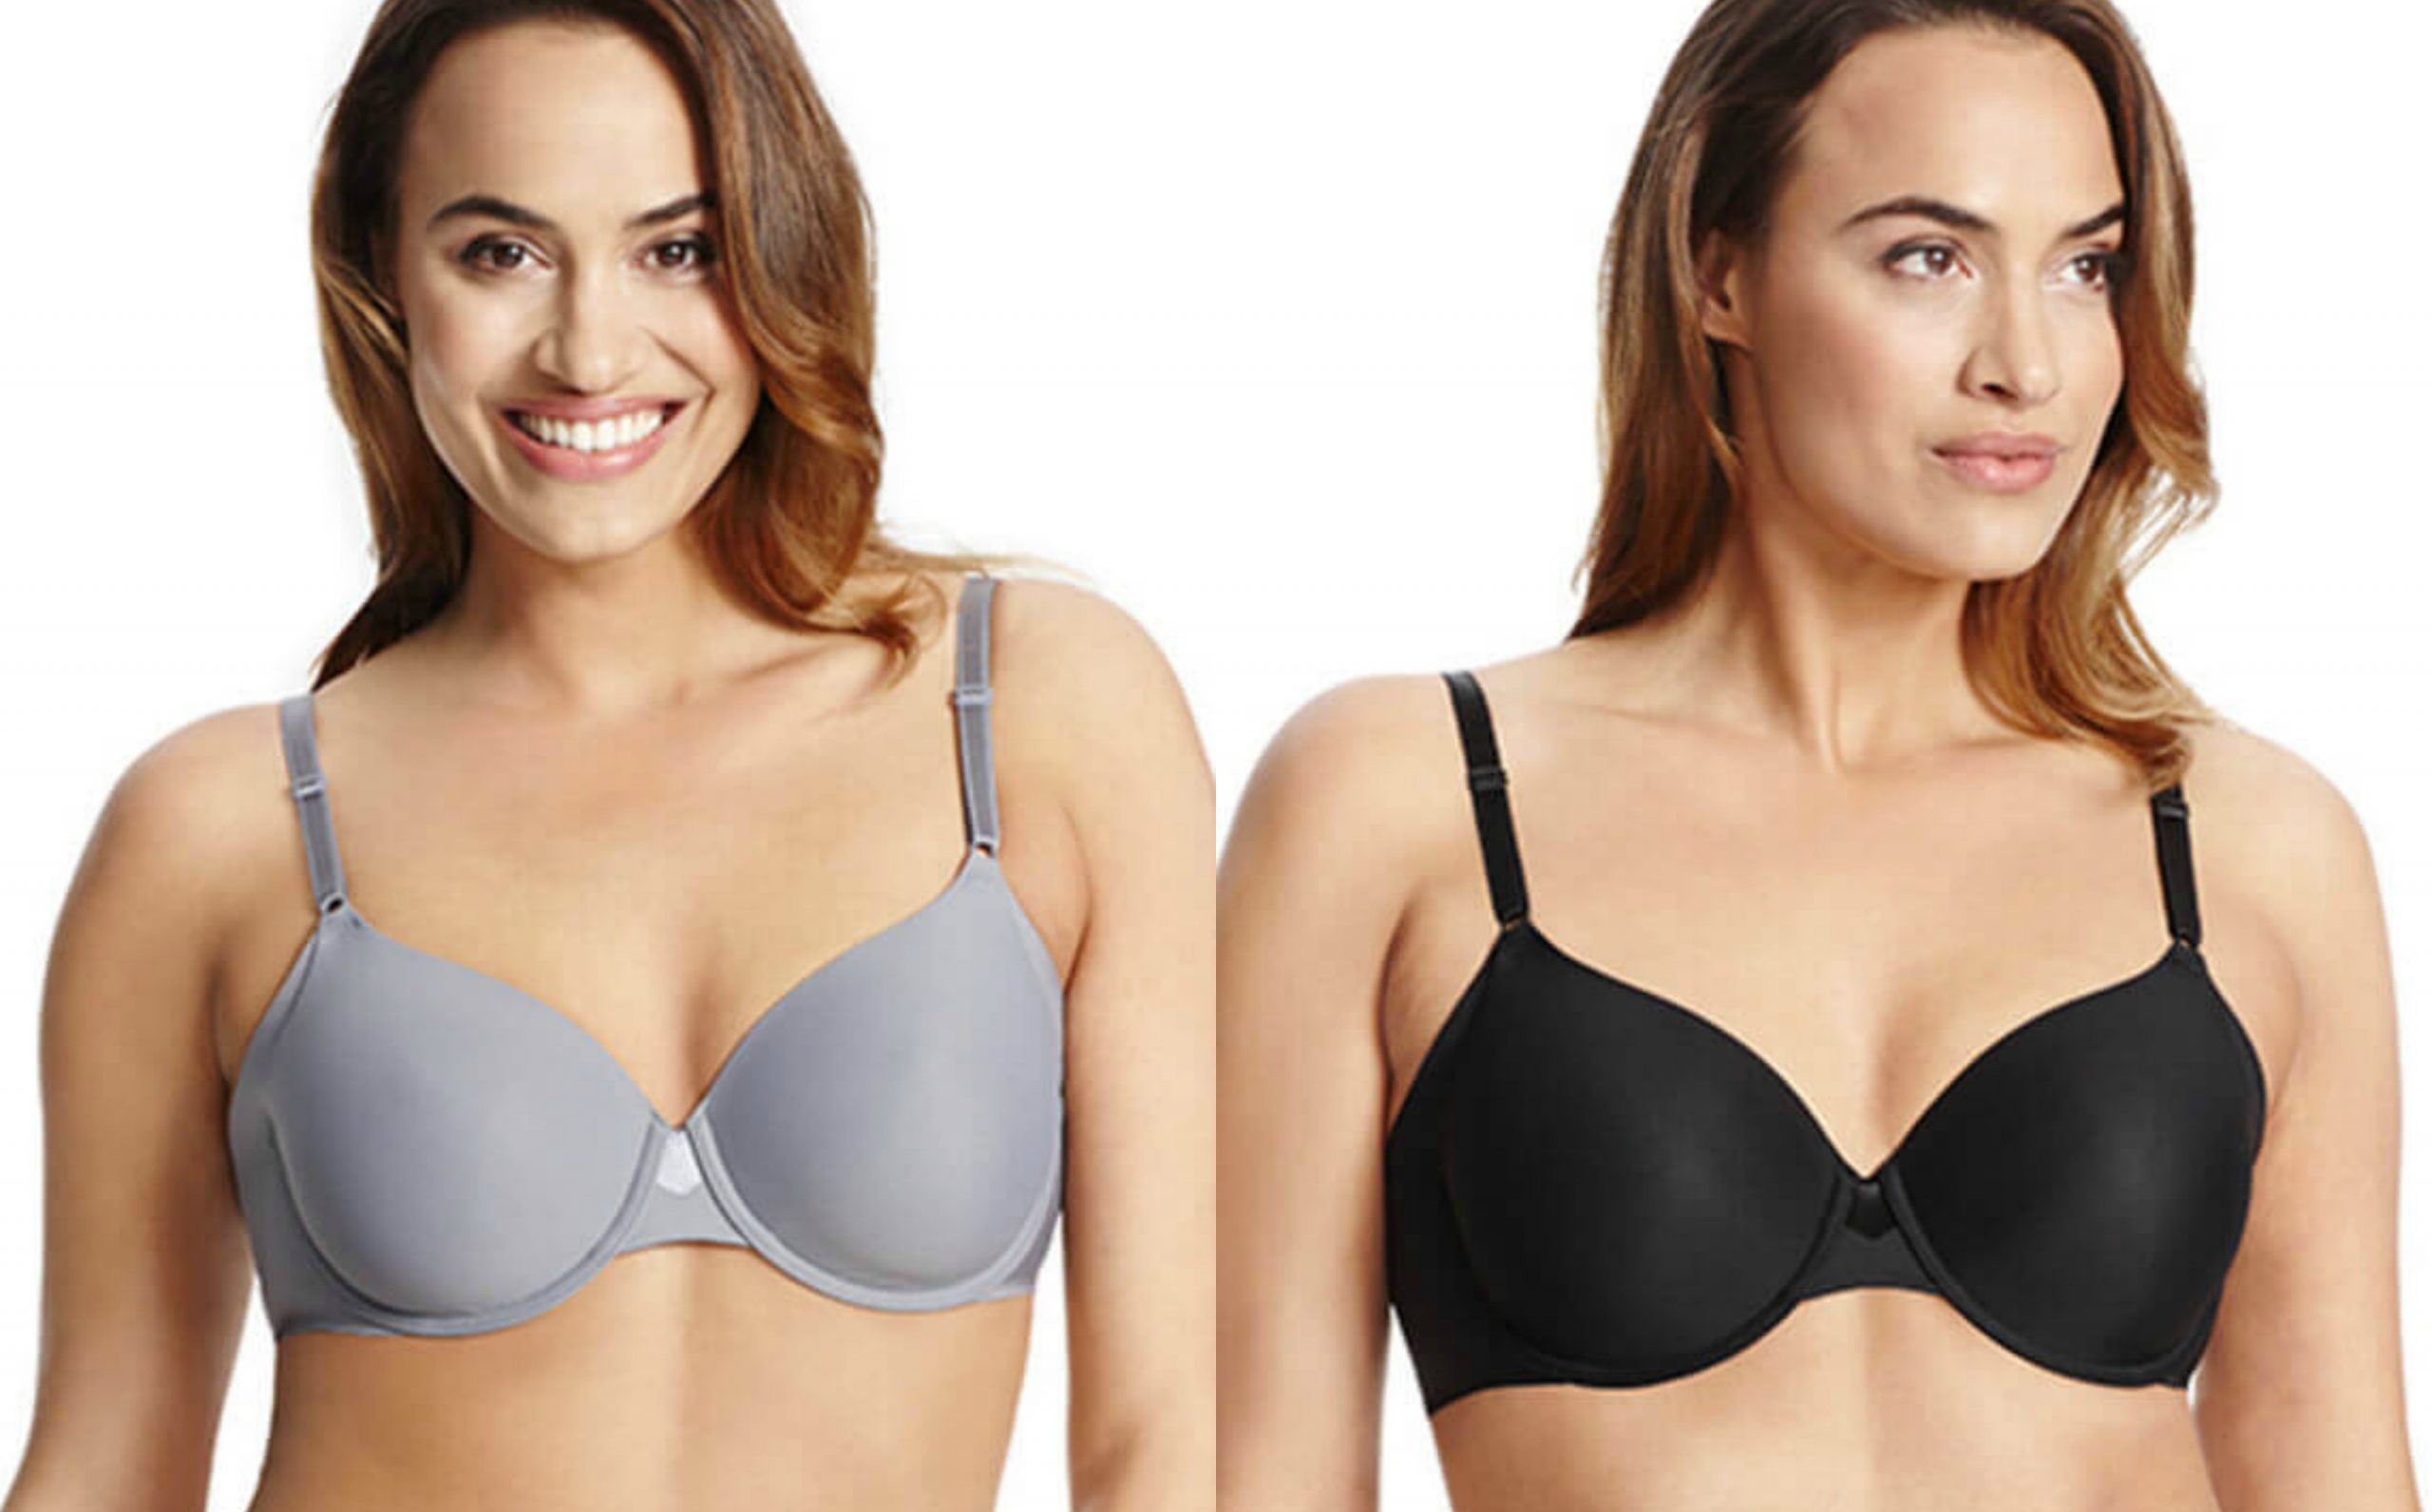 5 More Pieces Of Lingerie For Women 50+ – Bra Doctor's Blog